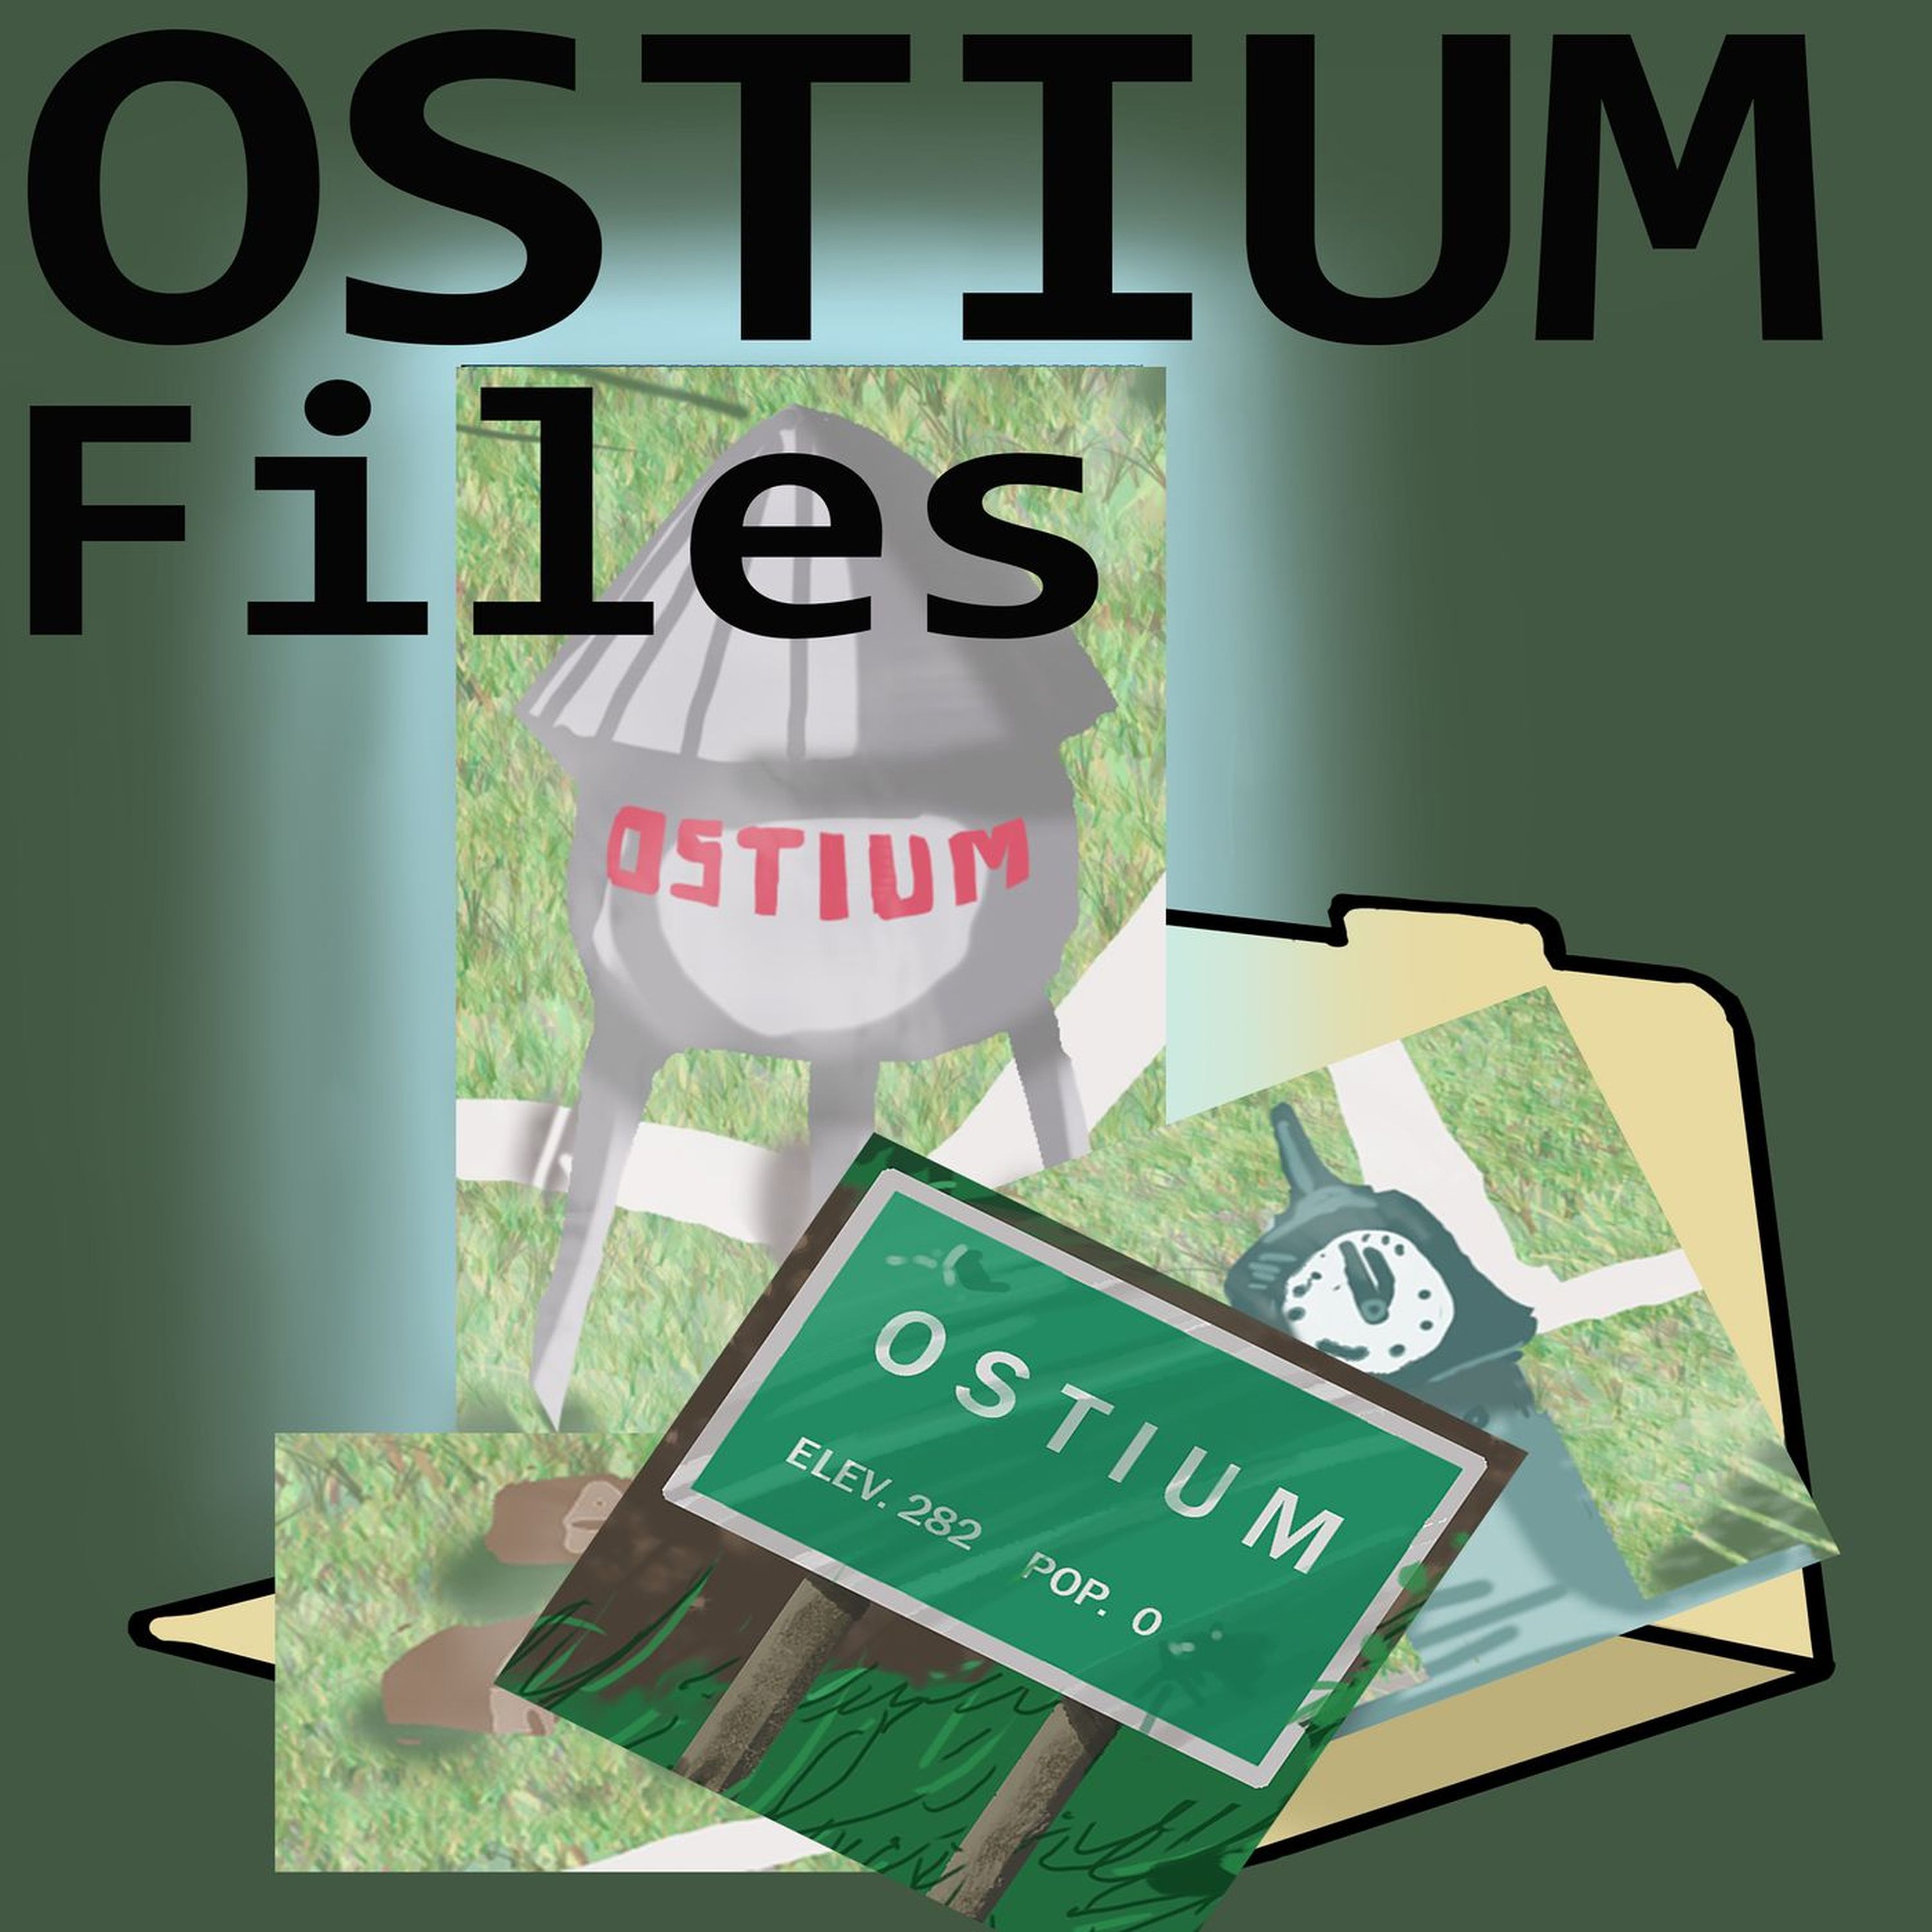 Ostium Hit Half a Million Downloads So Here's a Special Ostium File For You!